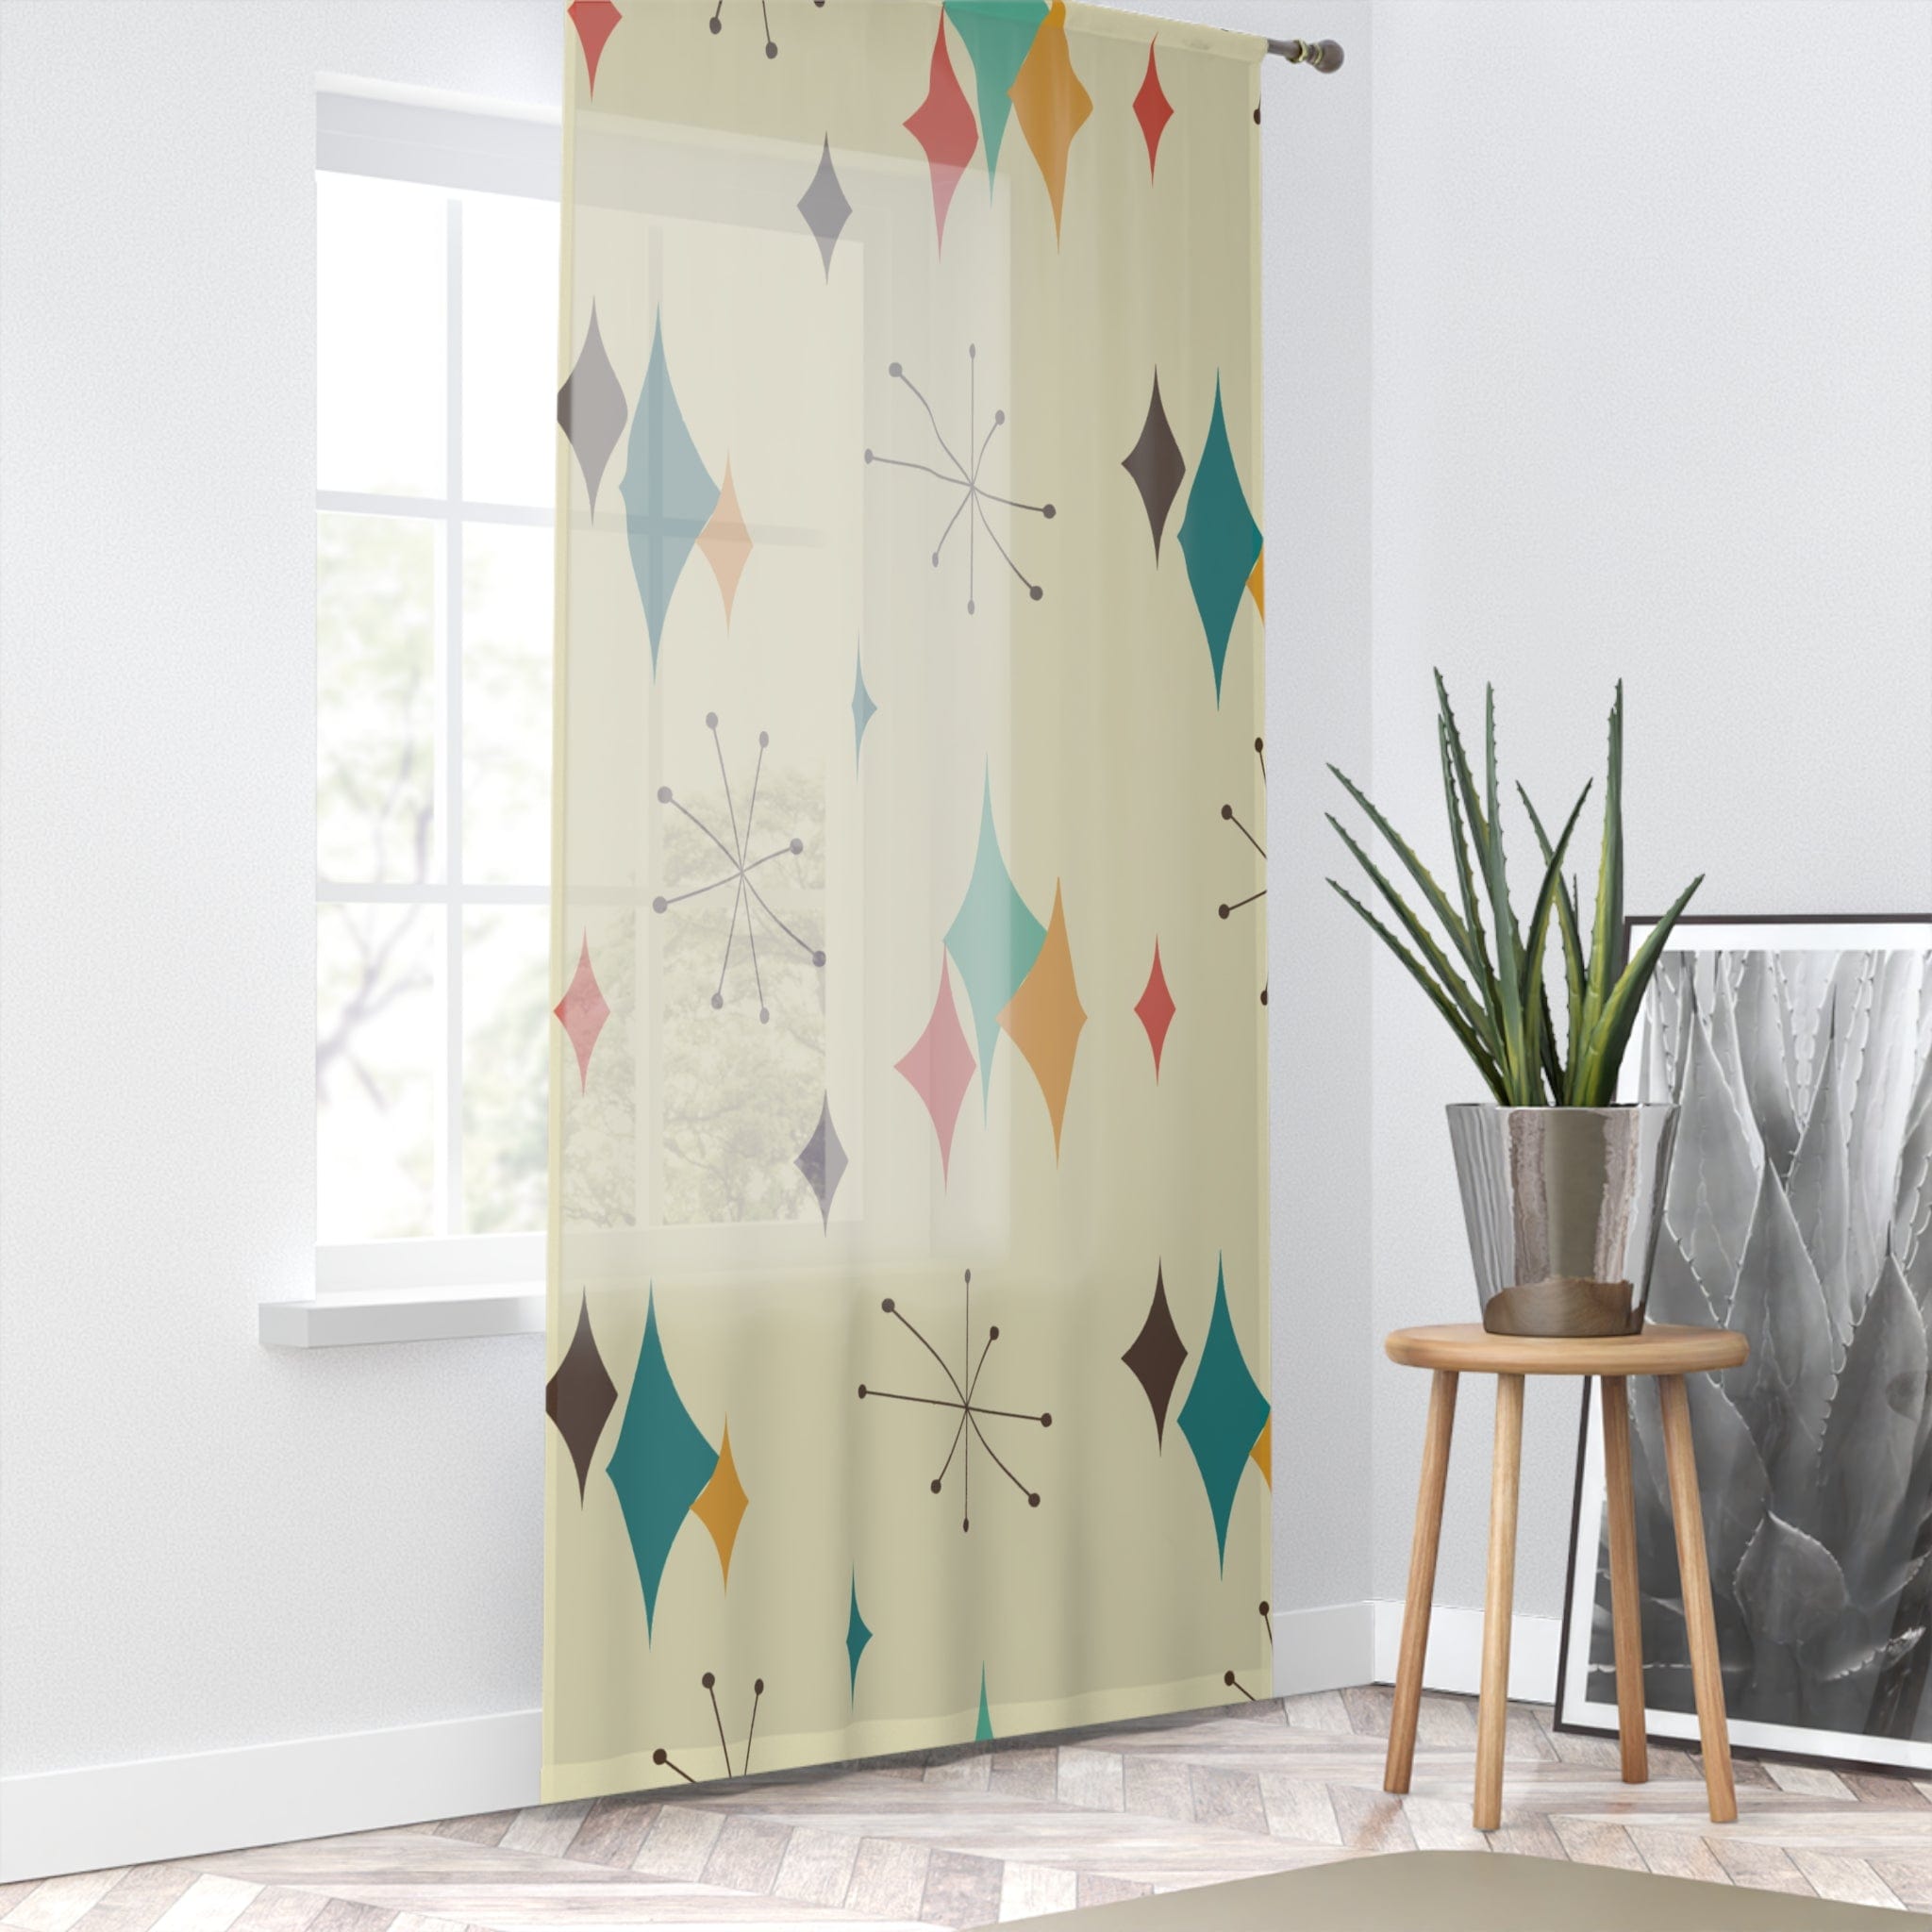 Kate McEnroe New York Mid Century Modern Franciscan Starburst Window Curtains, Atomic Age Design, Retro Groovy Curtain Panel, Vintage 50s Vibe, Funky Draperies Window Curtains Sheer / White / 50&quot; × 84&quot; 13423647725679264746